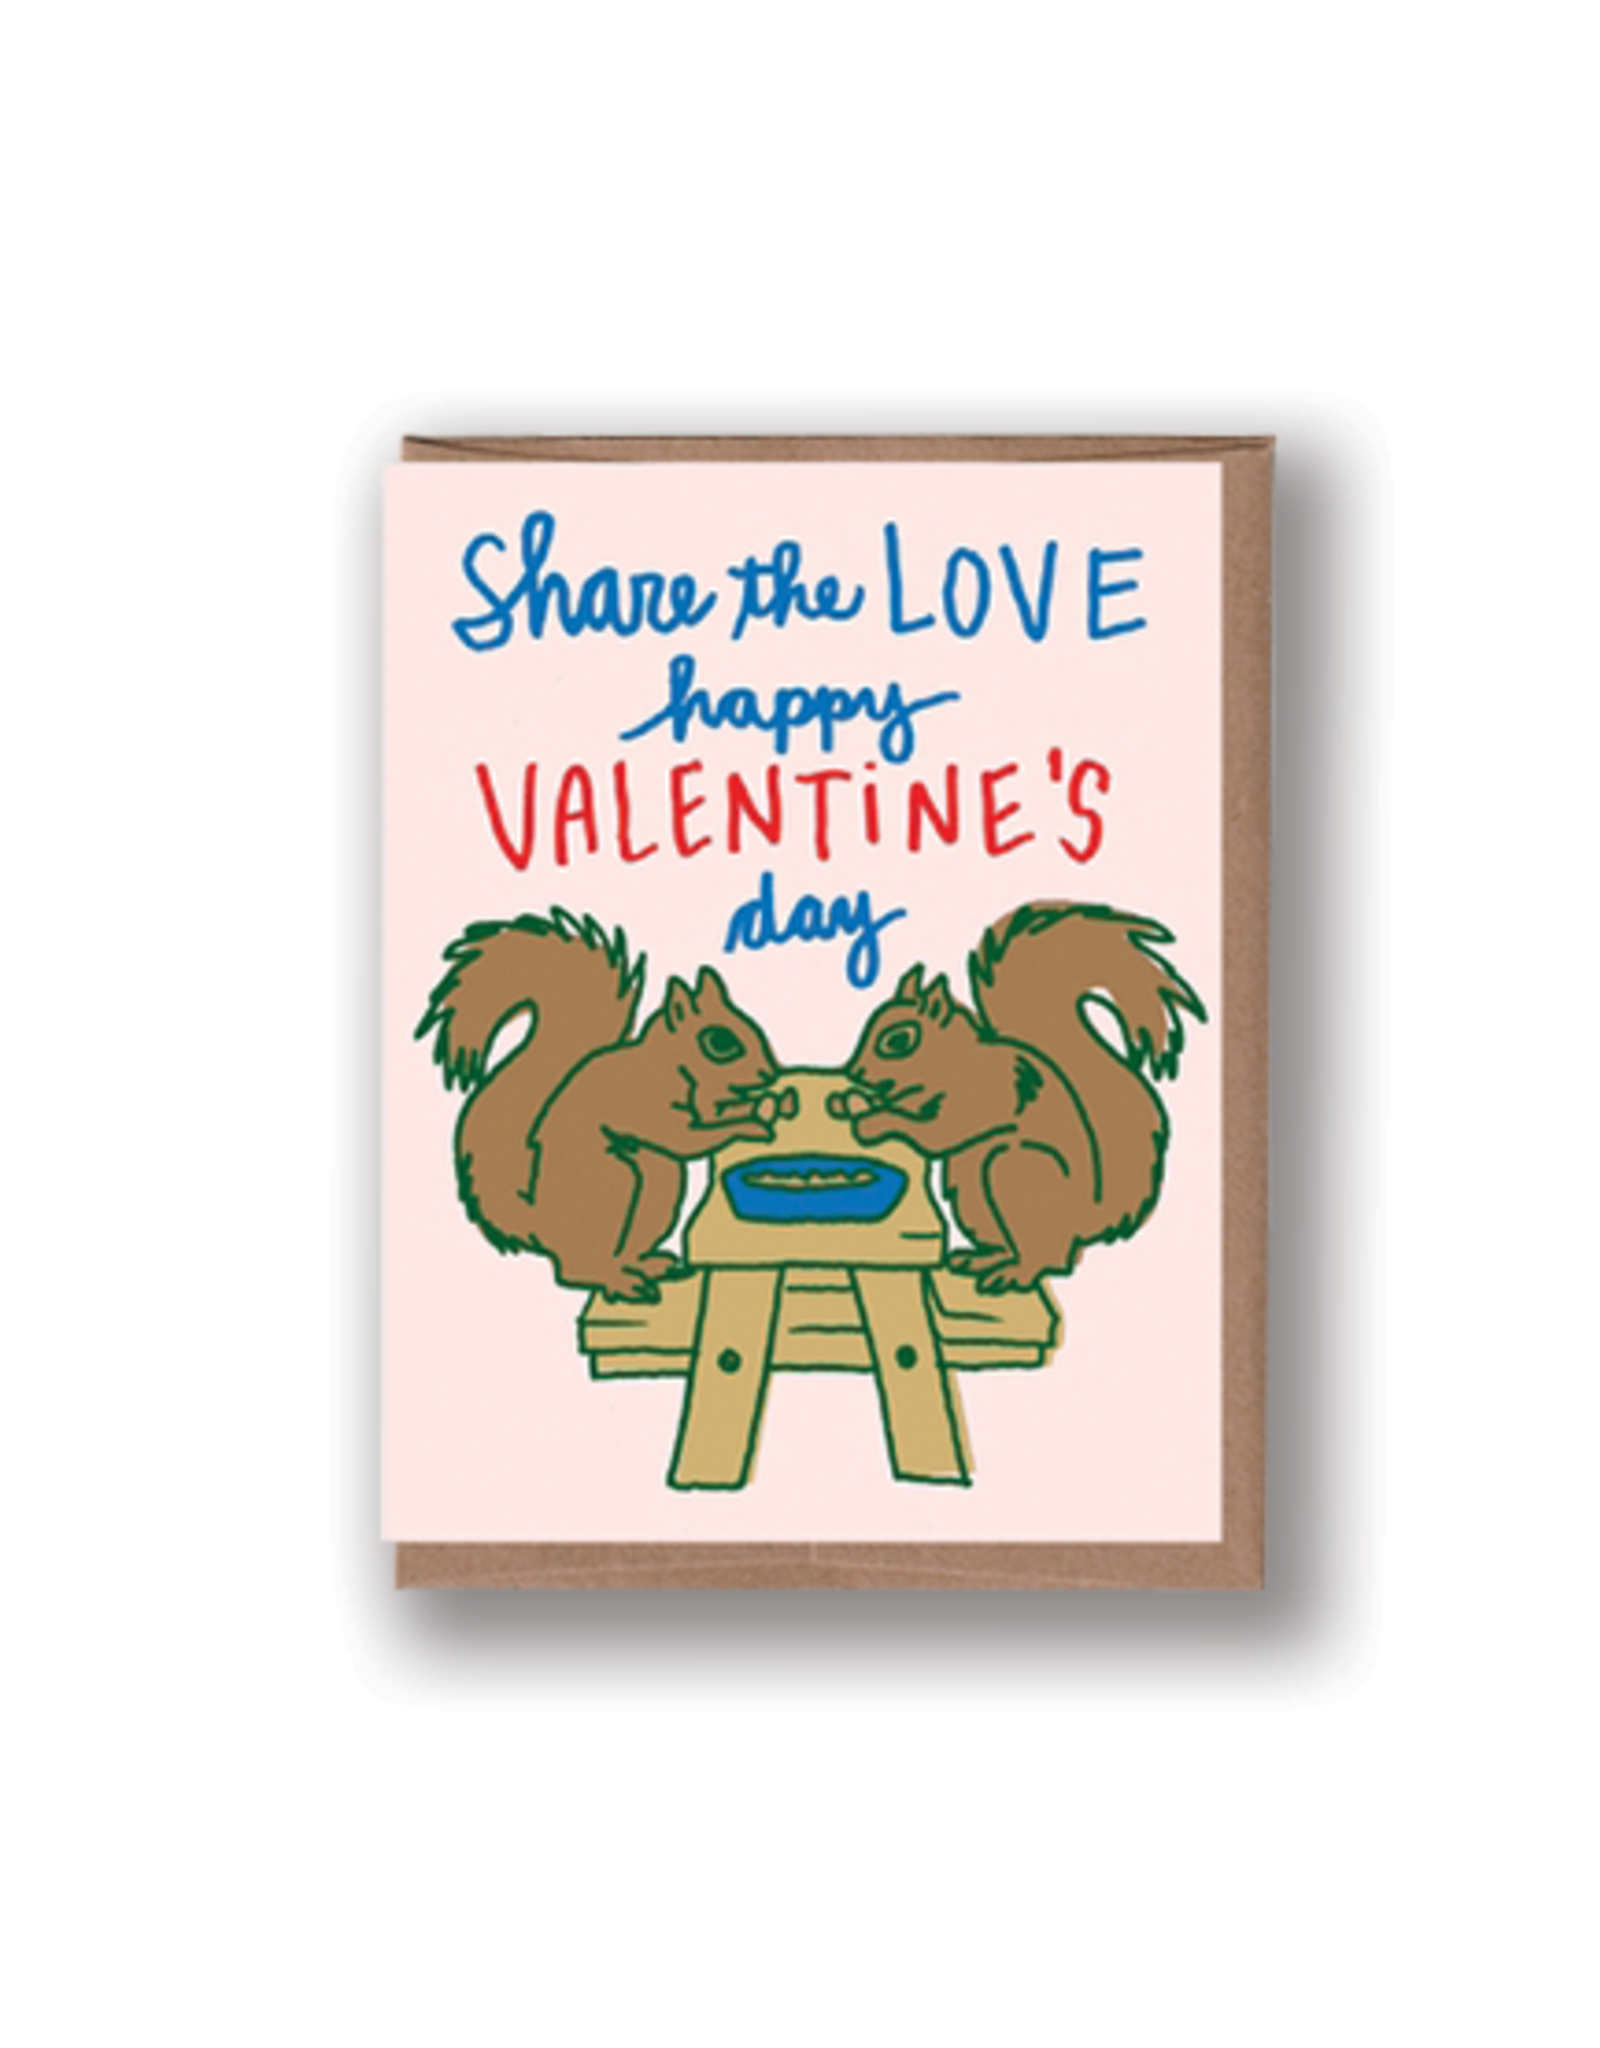 Share the Love Valentine Card